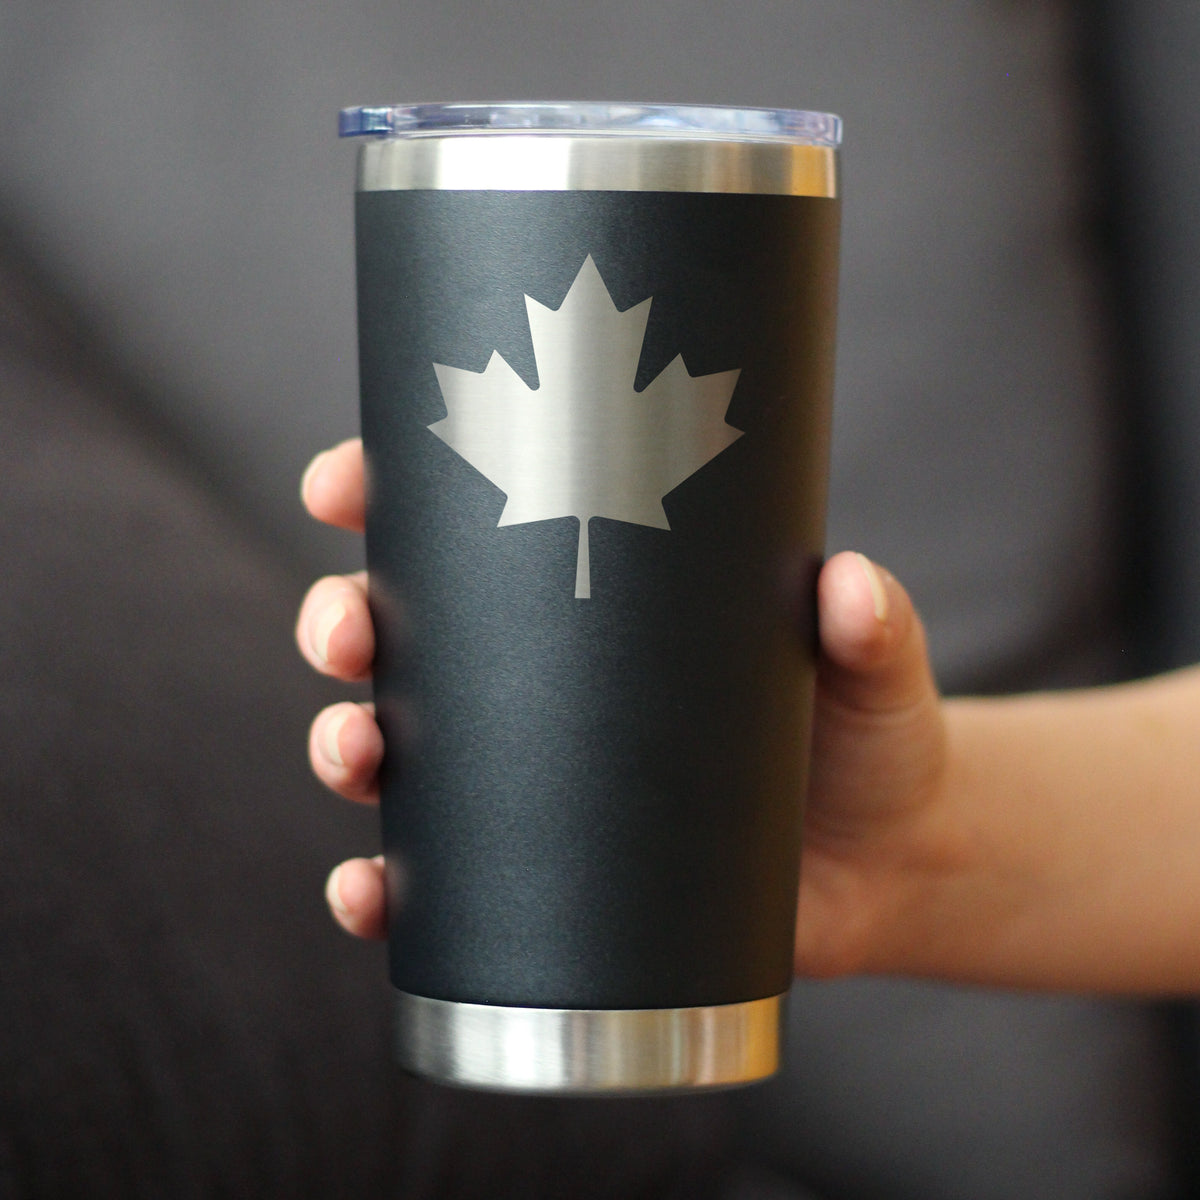 Canada Maple Leaf - Insulated Coffee Tumbler Cup with Sliding Lid - Stainless Steel Travel Mug - Canadian Flag Gifts and Decor for Women and Men